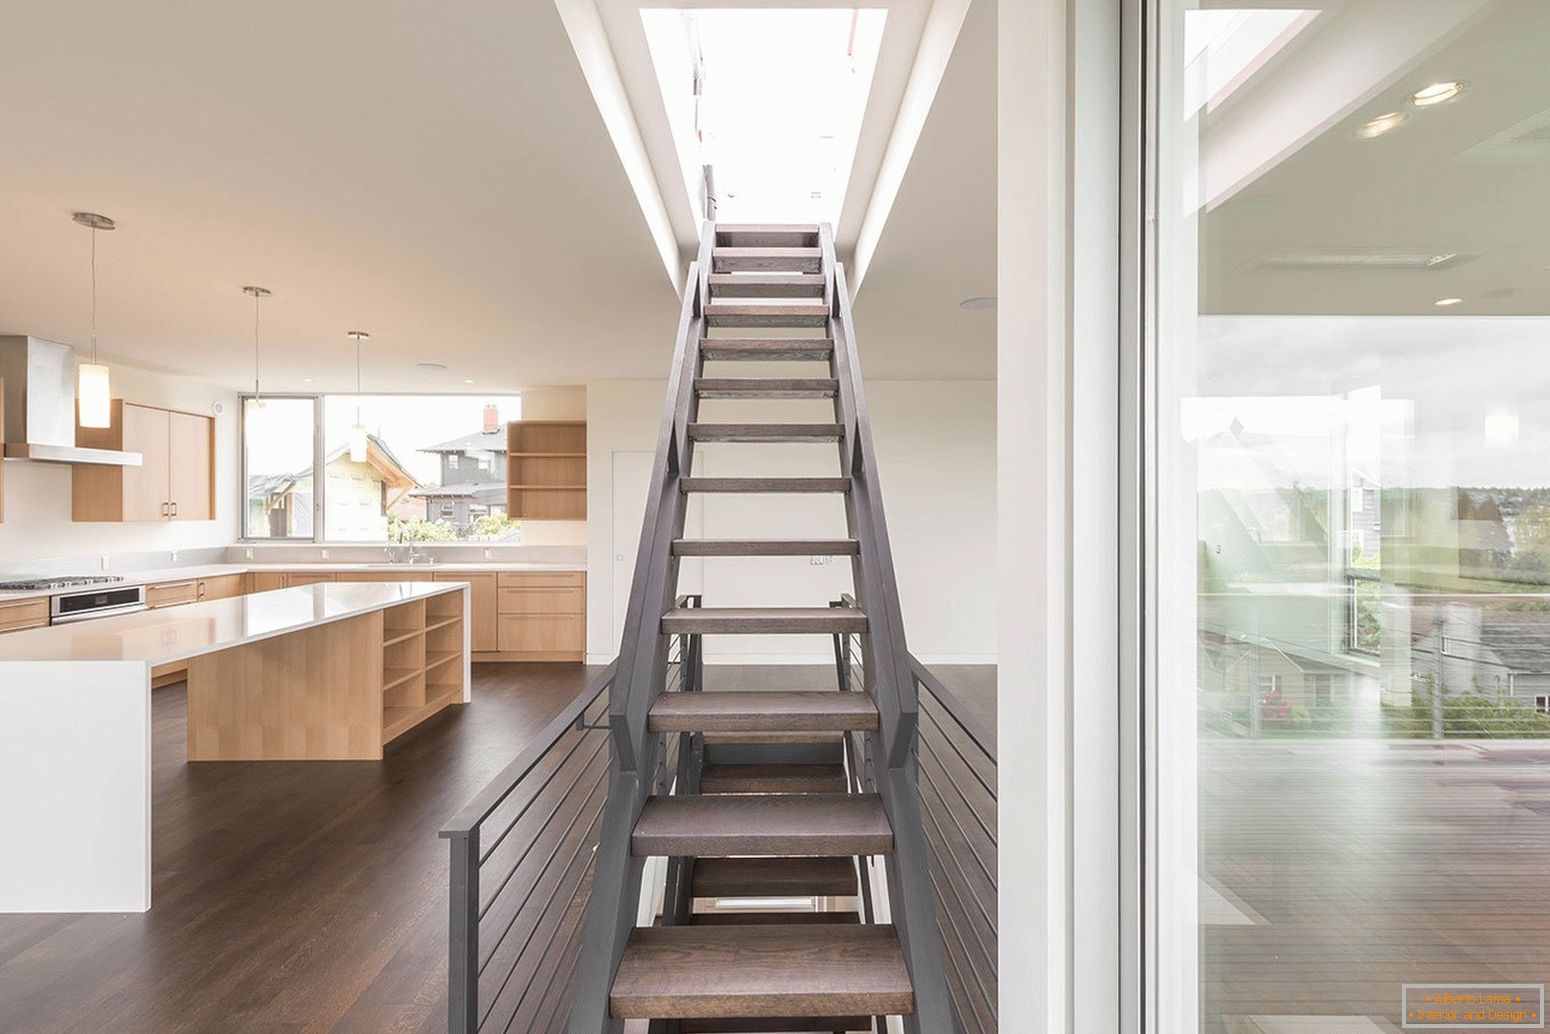 Stairs in loft style